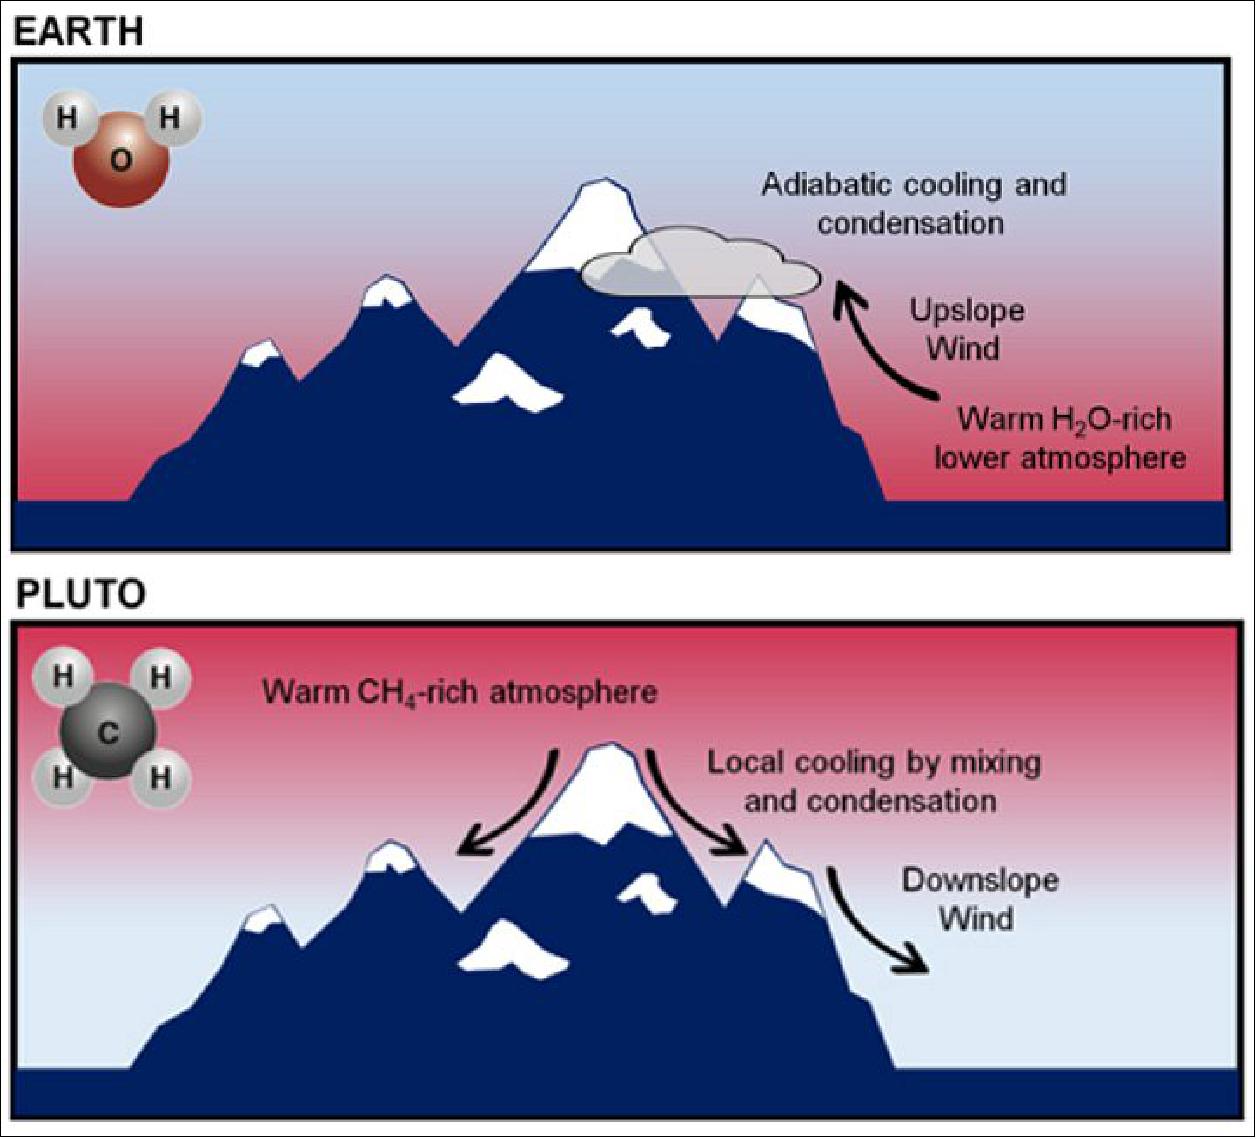 Figure 25: On Earth, atmospheric temperatures decrease with altitude, and that cool air chills land surfaces at high elevations. When a moist wind moves toward and over a mountain on Earth, its water vapor cools and condenses, forming clouds and snow, as seen on mountaintops like the Alps. — But on Pluto, the opposite occurs. The dwarf planet’s atmosphere actually gets warmer with altitude because methane gas absorbs solar radiation. However, the atmosphere is too thin to affect surface temperatures, which remain constant with altitude. And unlike the way winds tend to ride up over mountains on Earth, the winds on Pluto mostly travel downslope (image credit: NASA Earth Observatory)